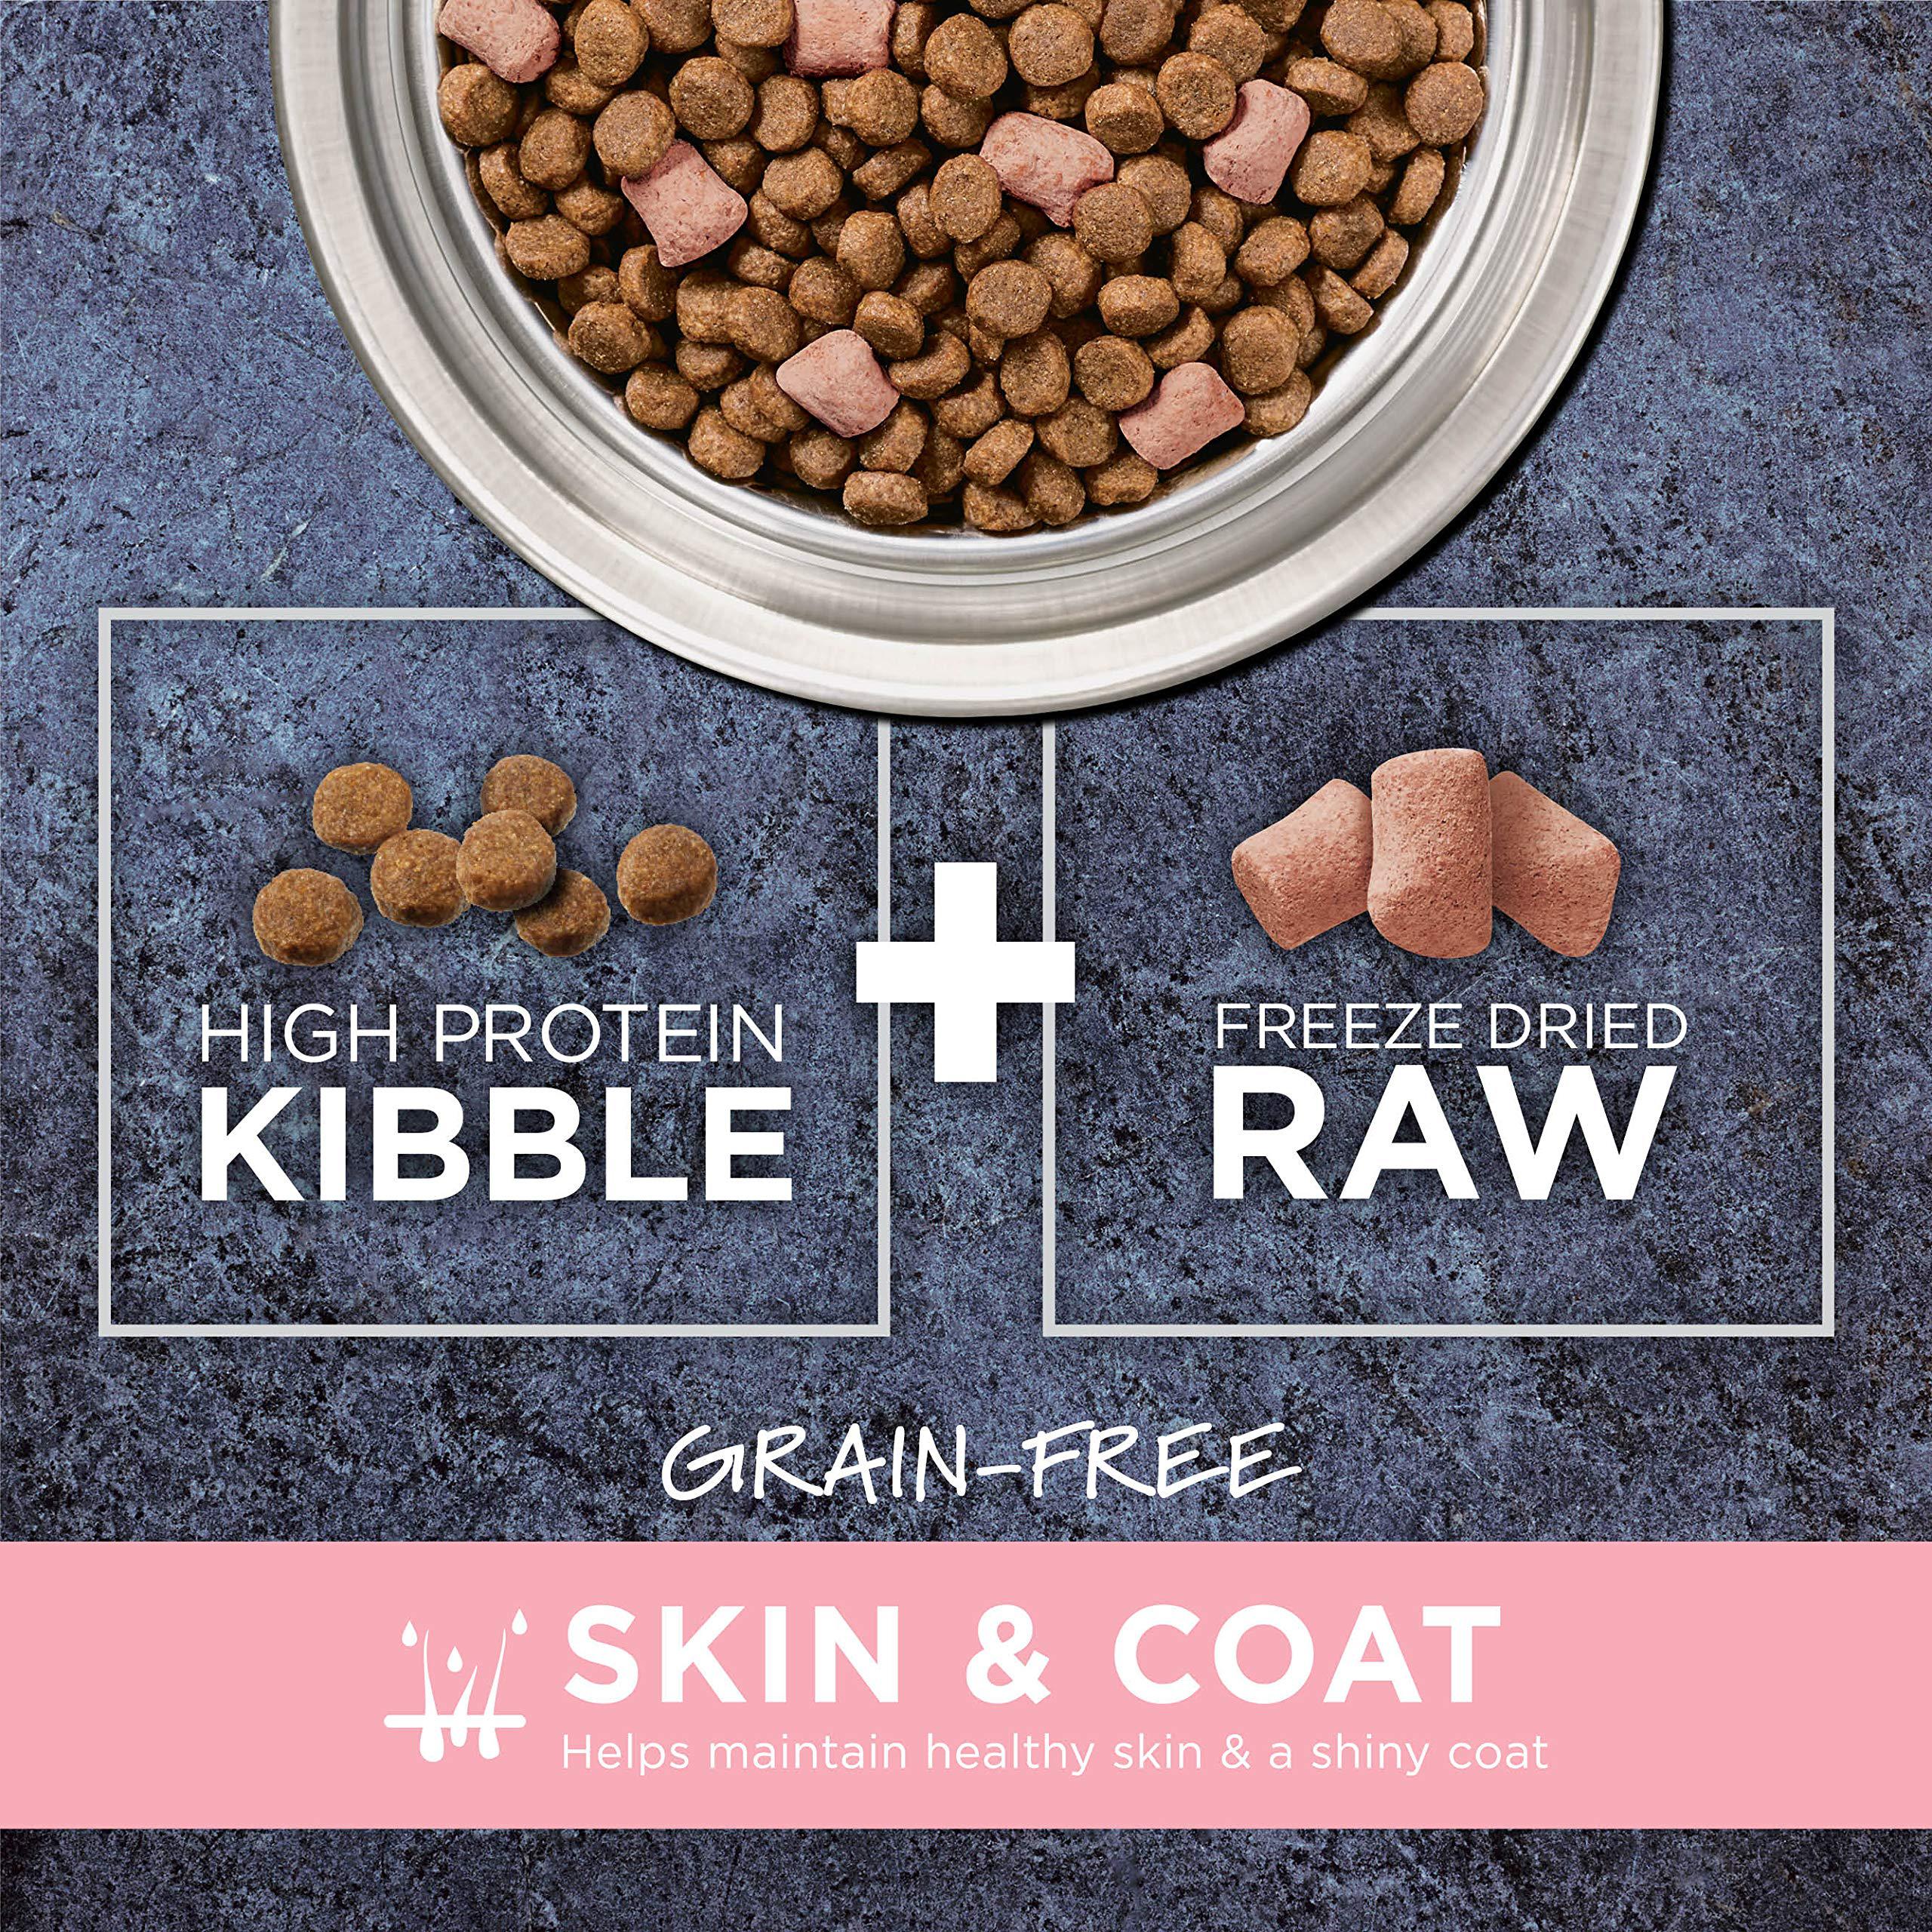 instinct raw boost skin & coat health grain free recipe with real chicken natural dry dog food by nature's variety, 18 lb. ba